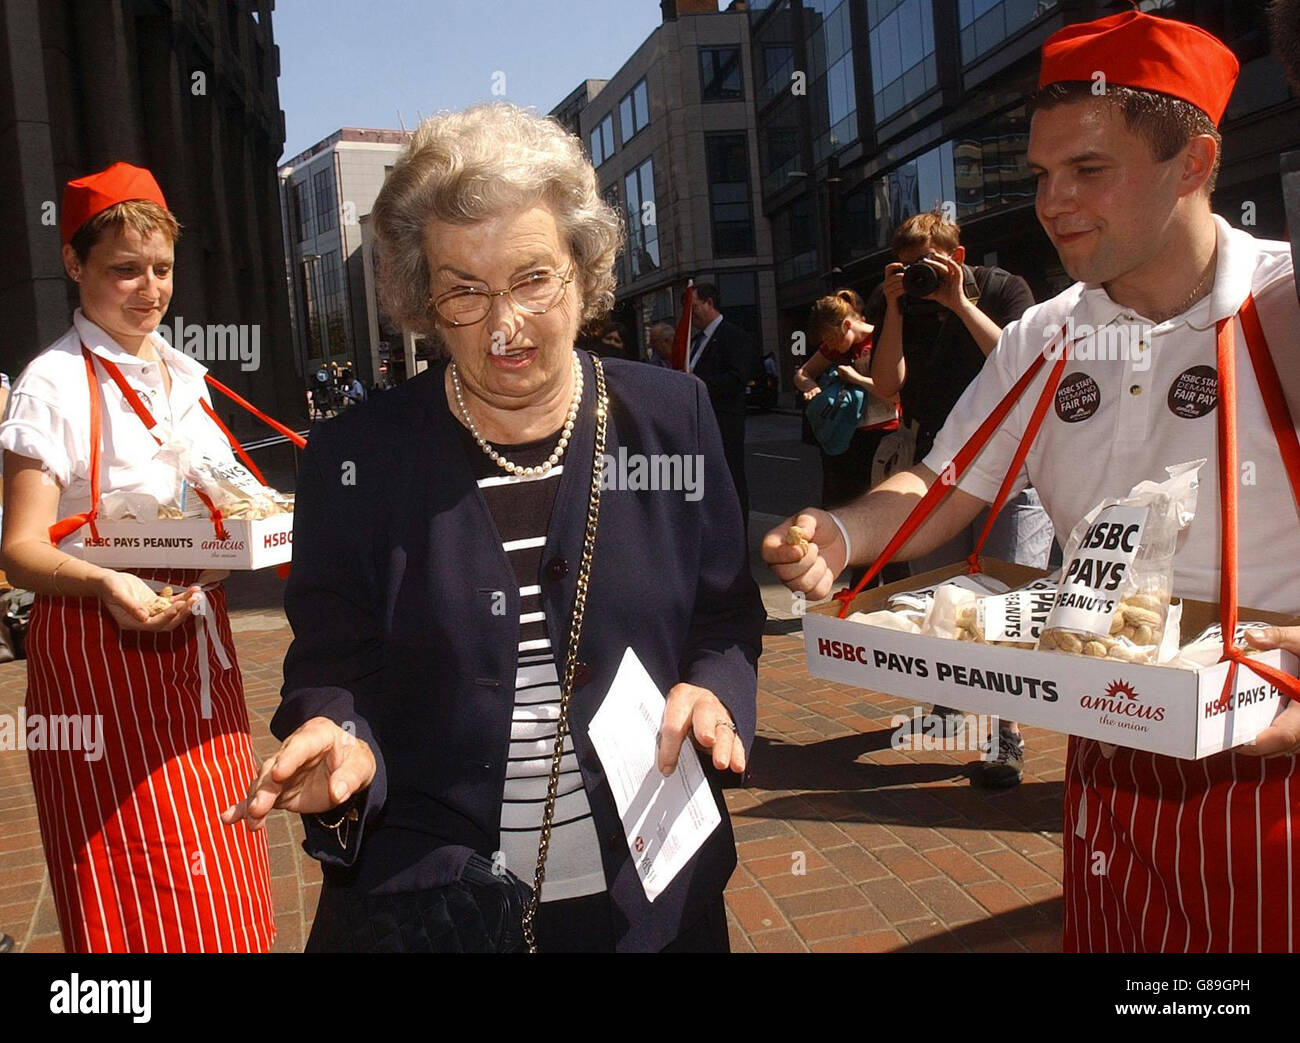 Members of AMICUS hand out peanuts to people attending the HSBC AGM in London, suggesting that the bank pays low wages to staff. Stock Photo